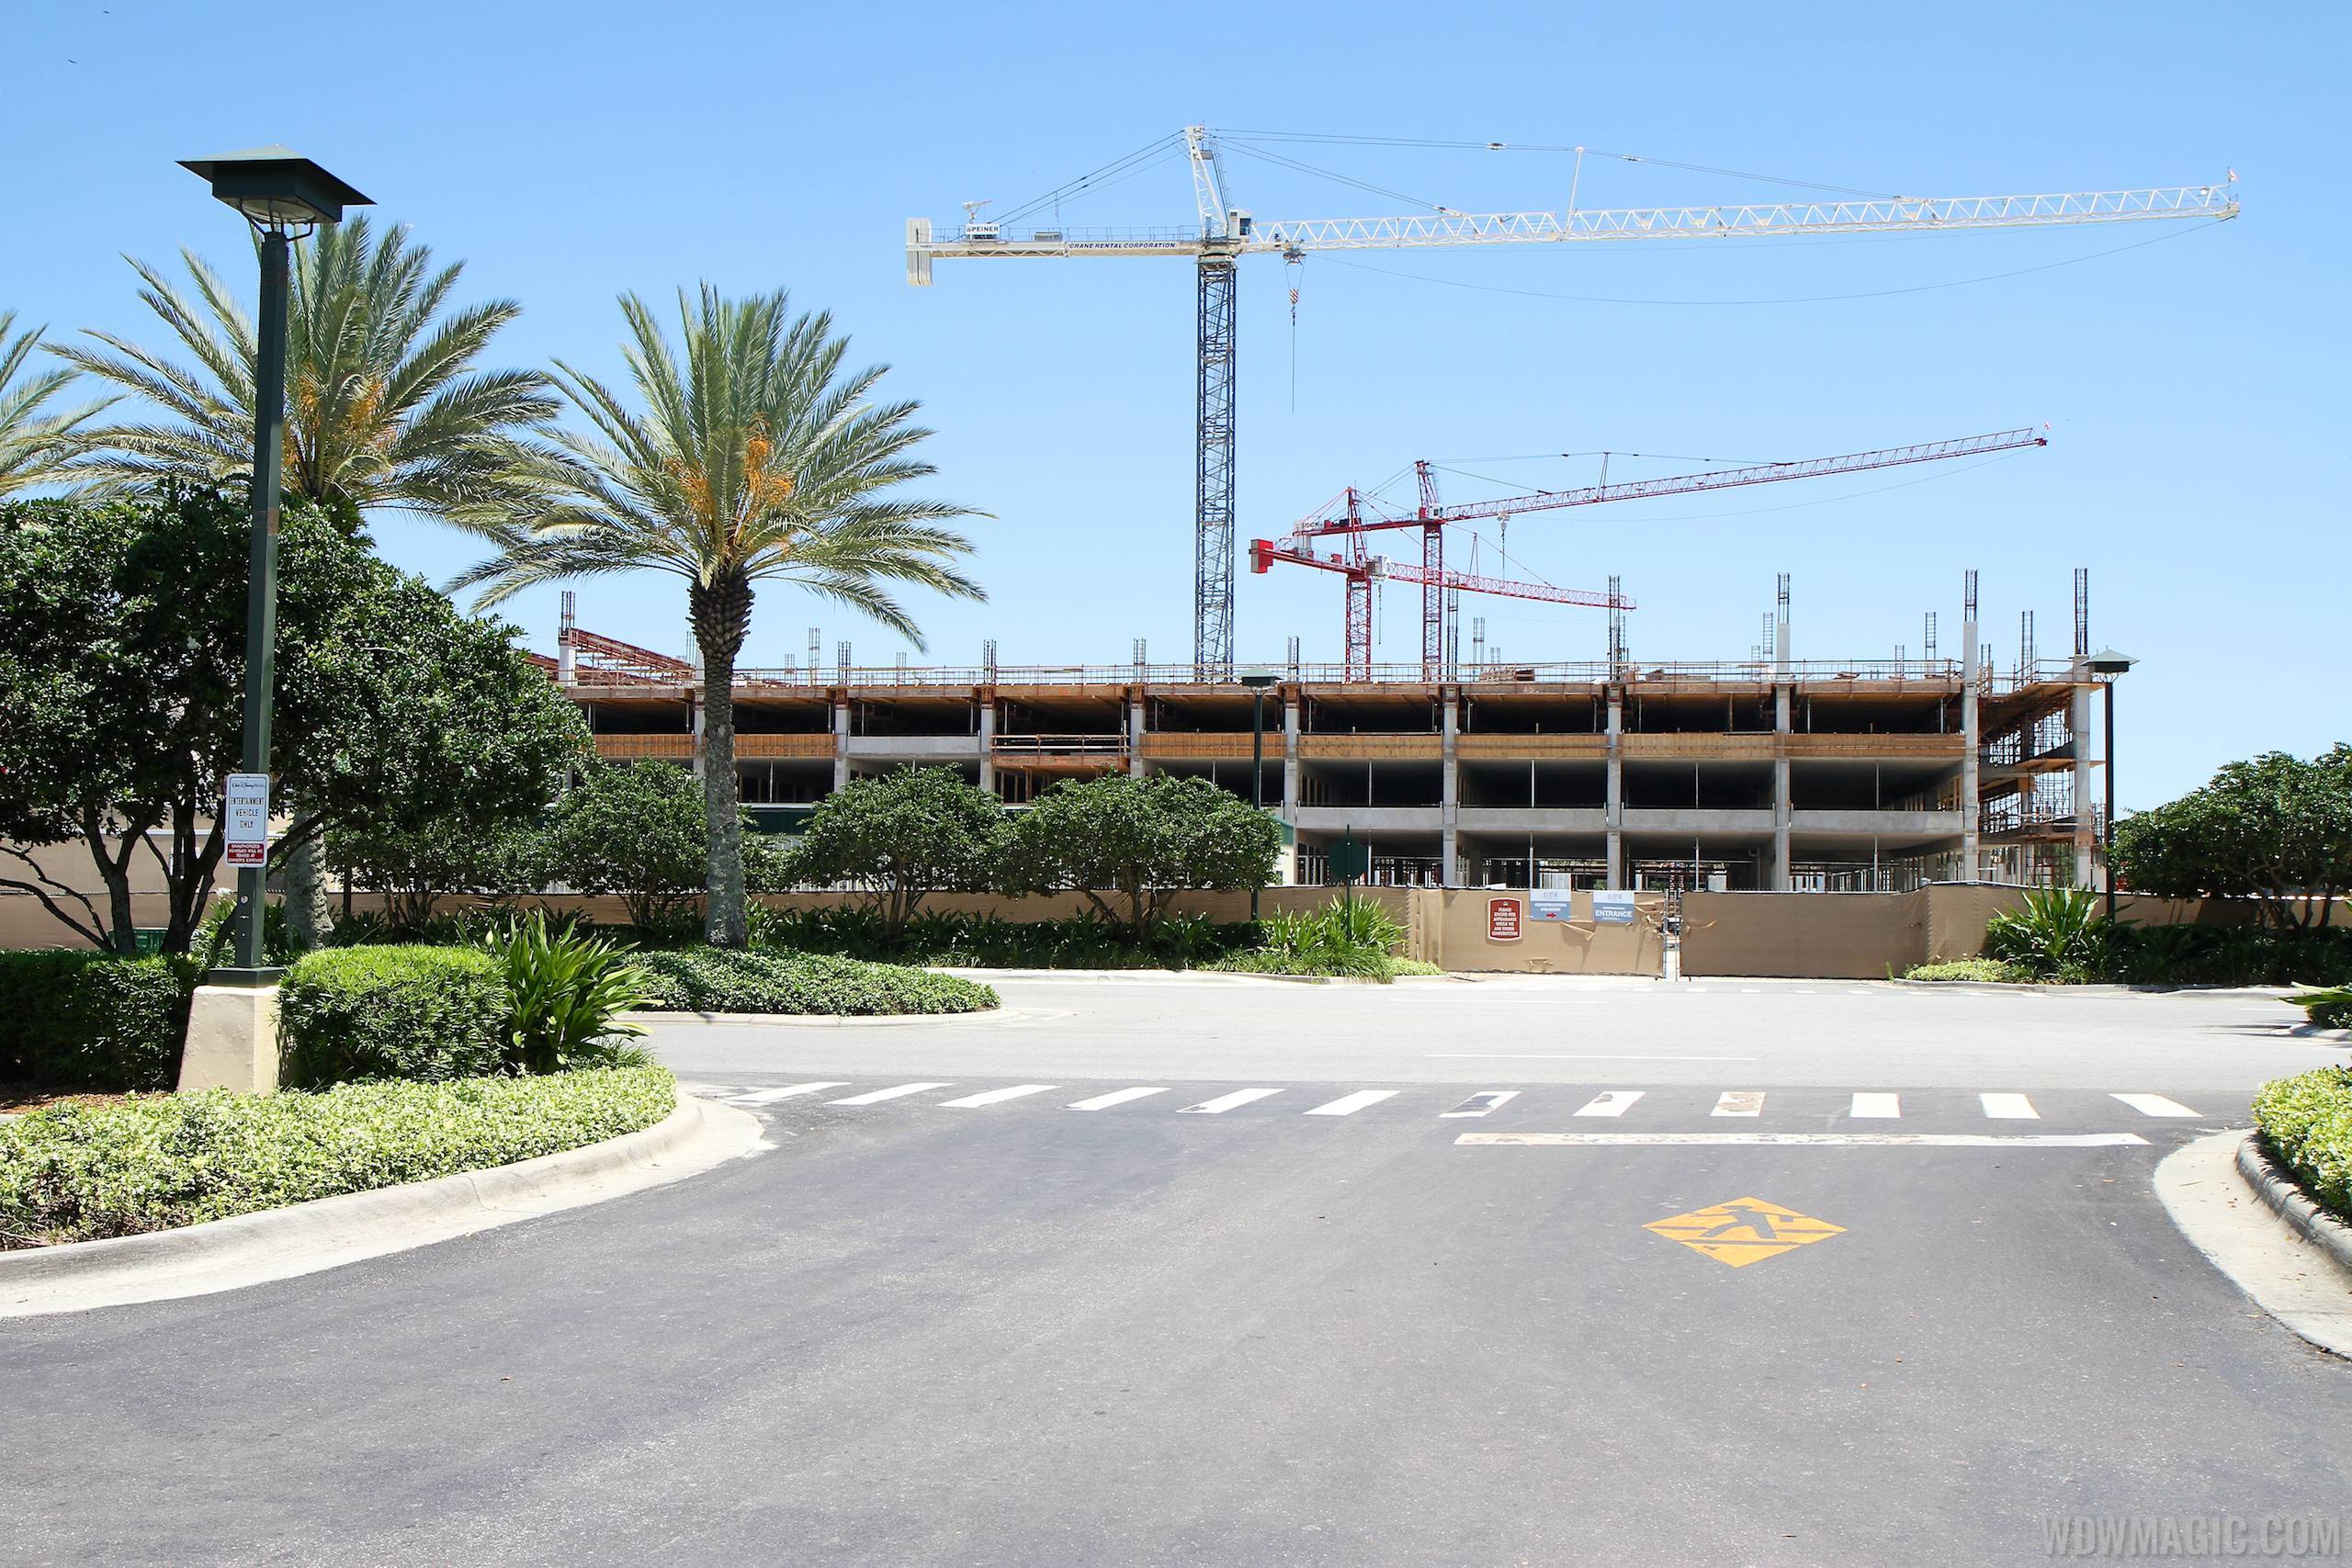 PHOTOS - Latest look at the Disney Springs West Side parking garage